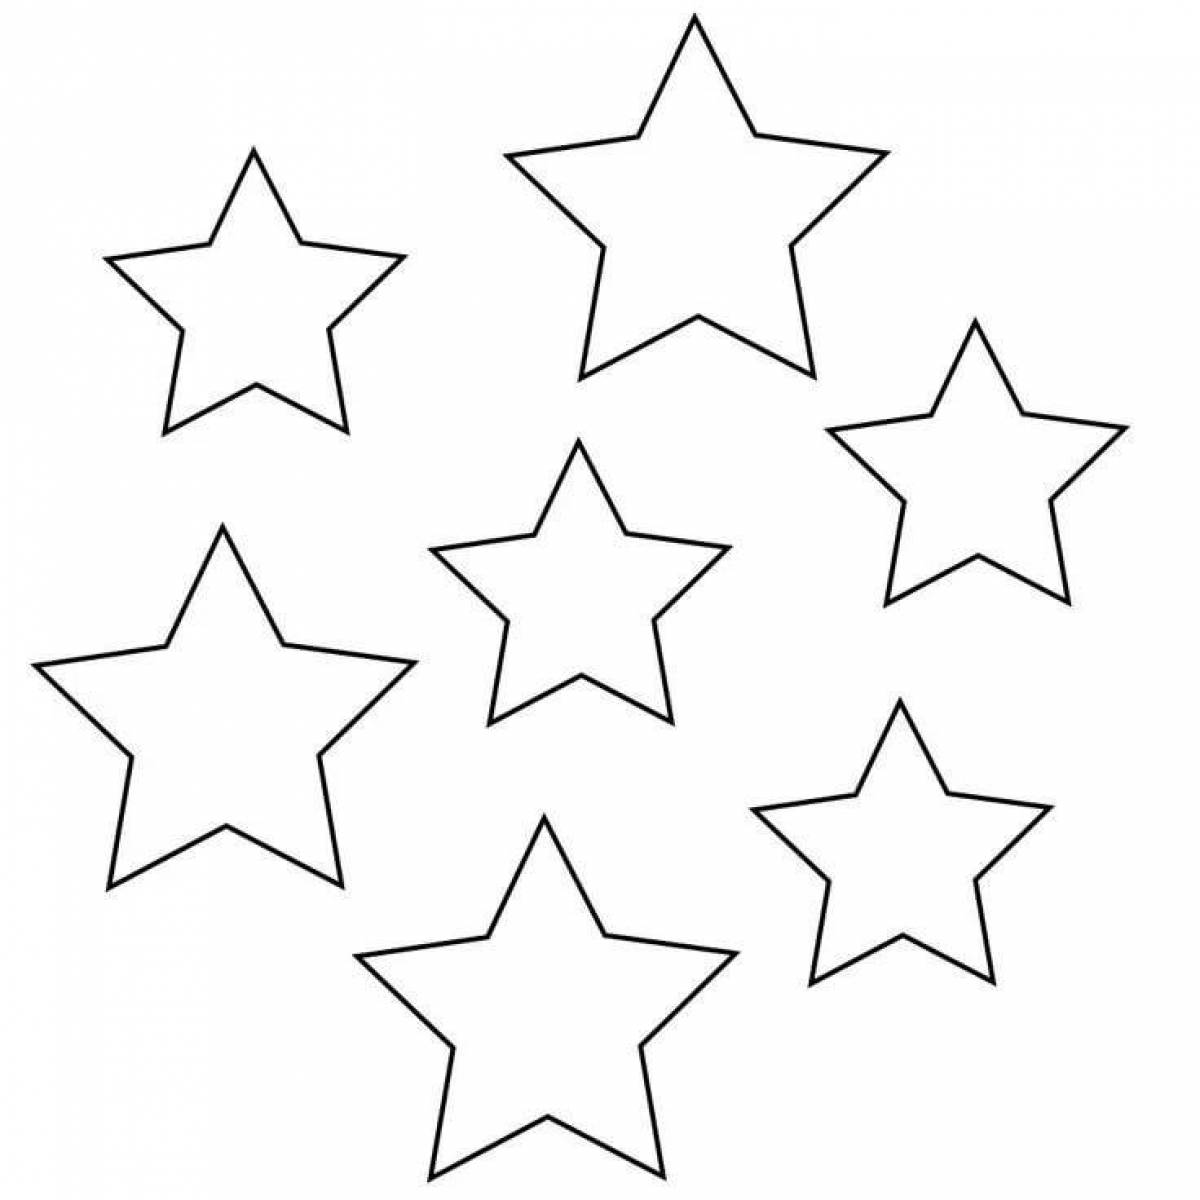 Charming coloring page with stars